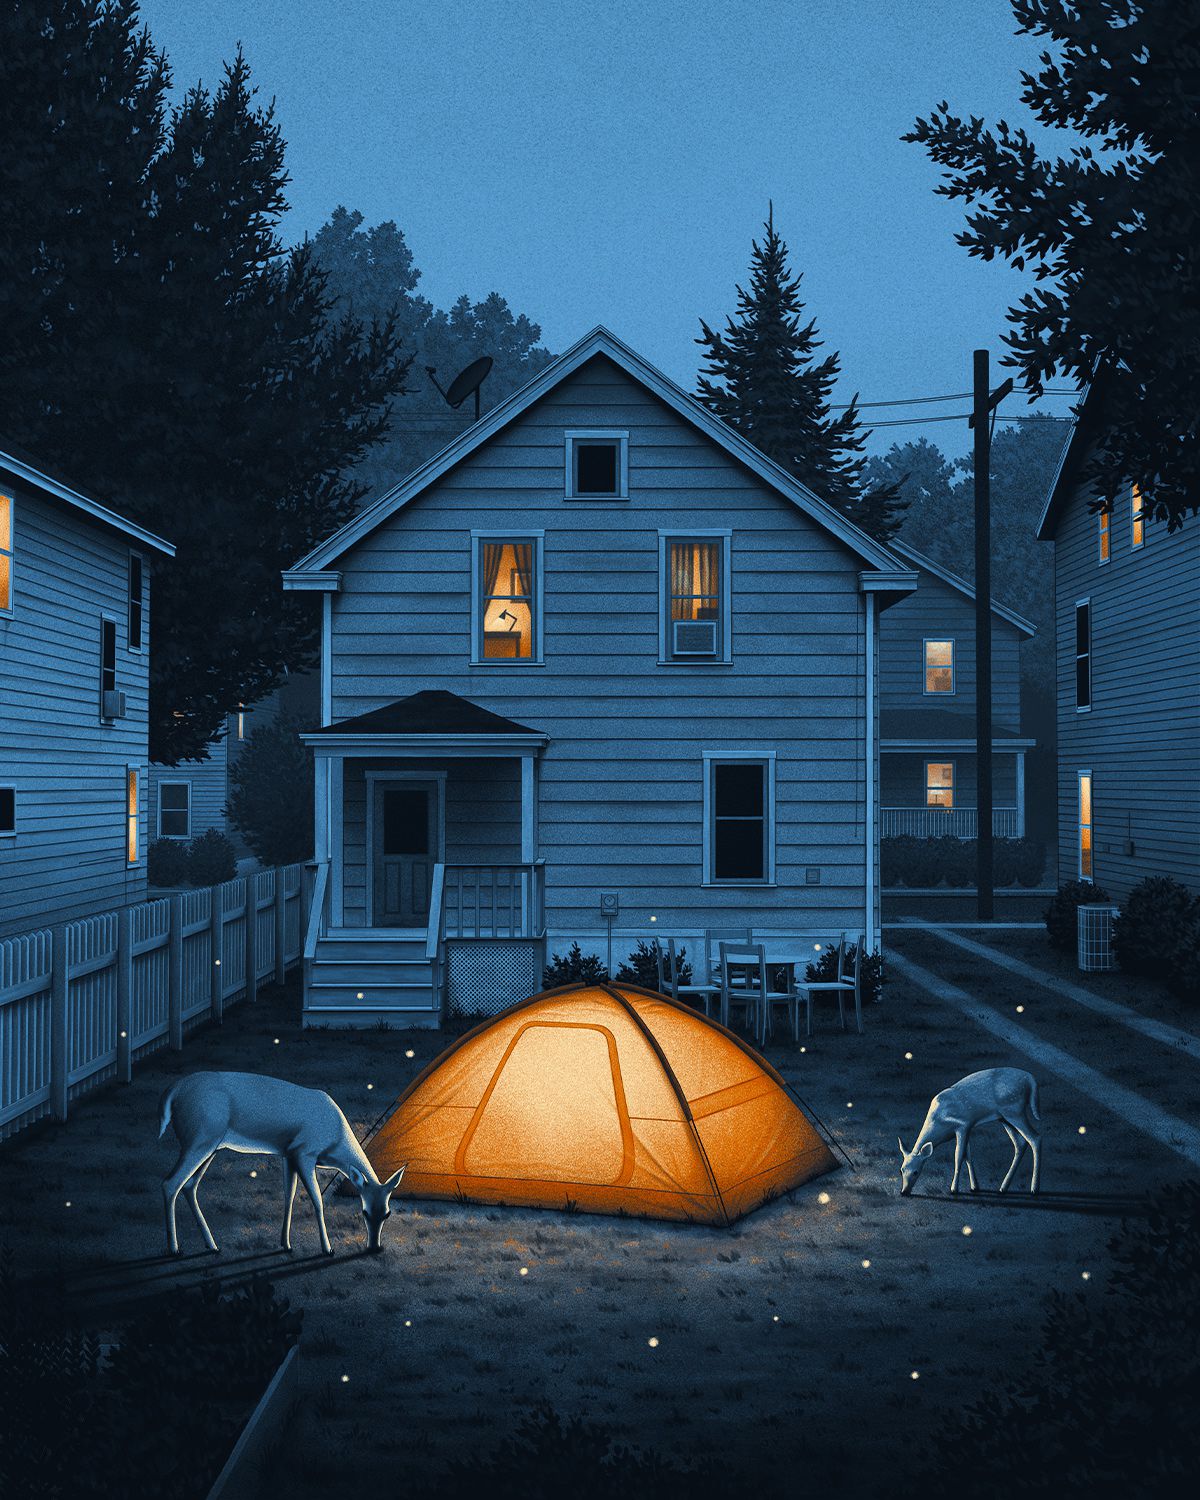 Nighttime Nostalgia Delightful Paintings By Nicholas Moegly 5